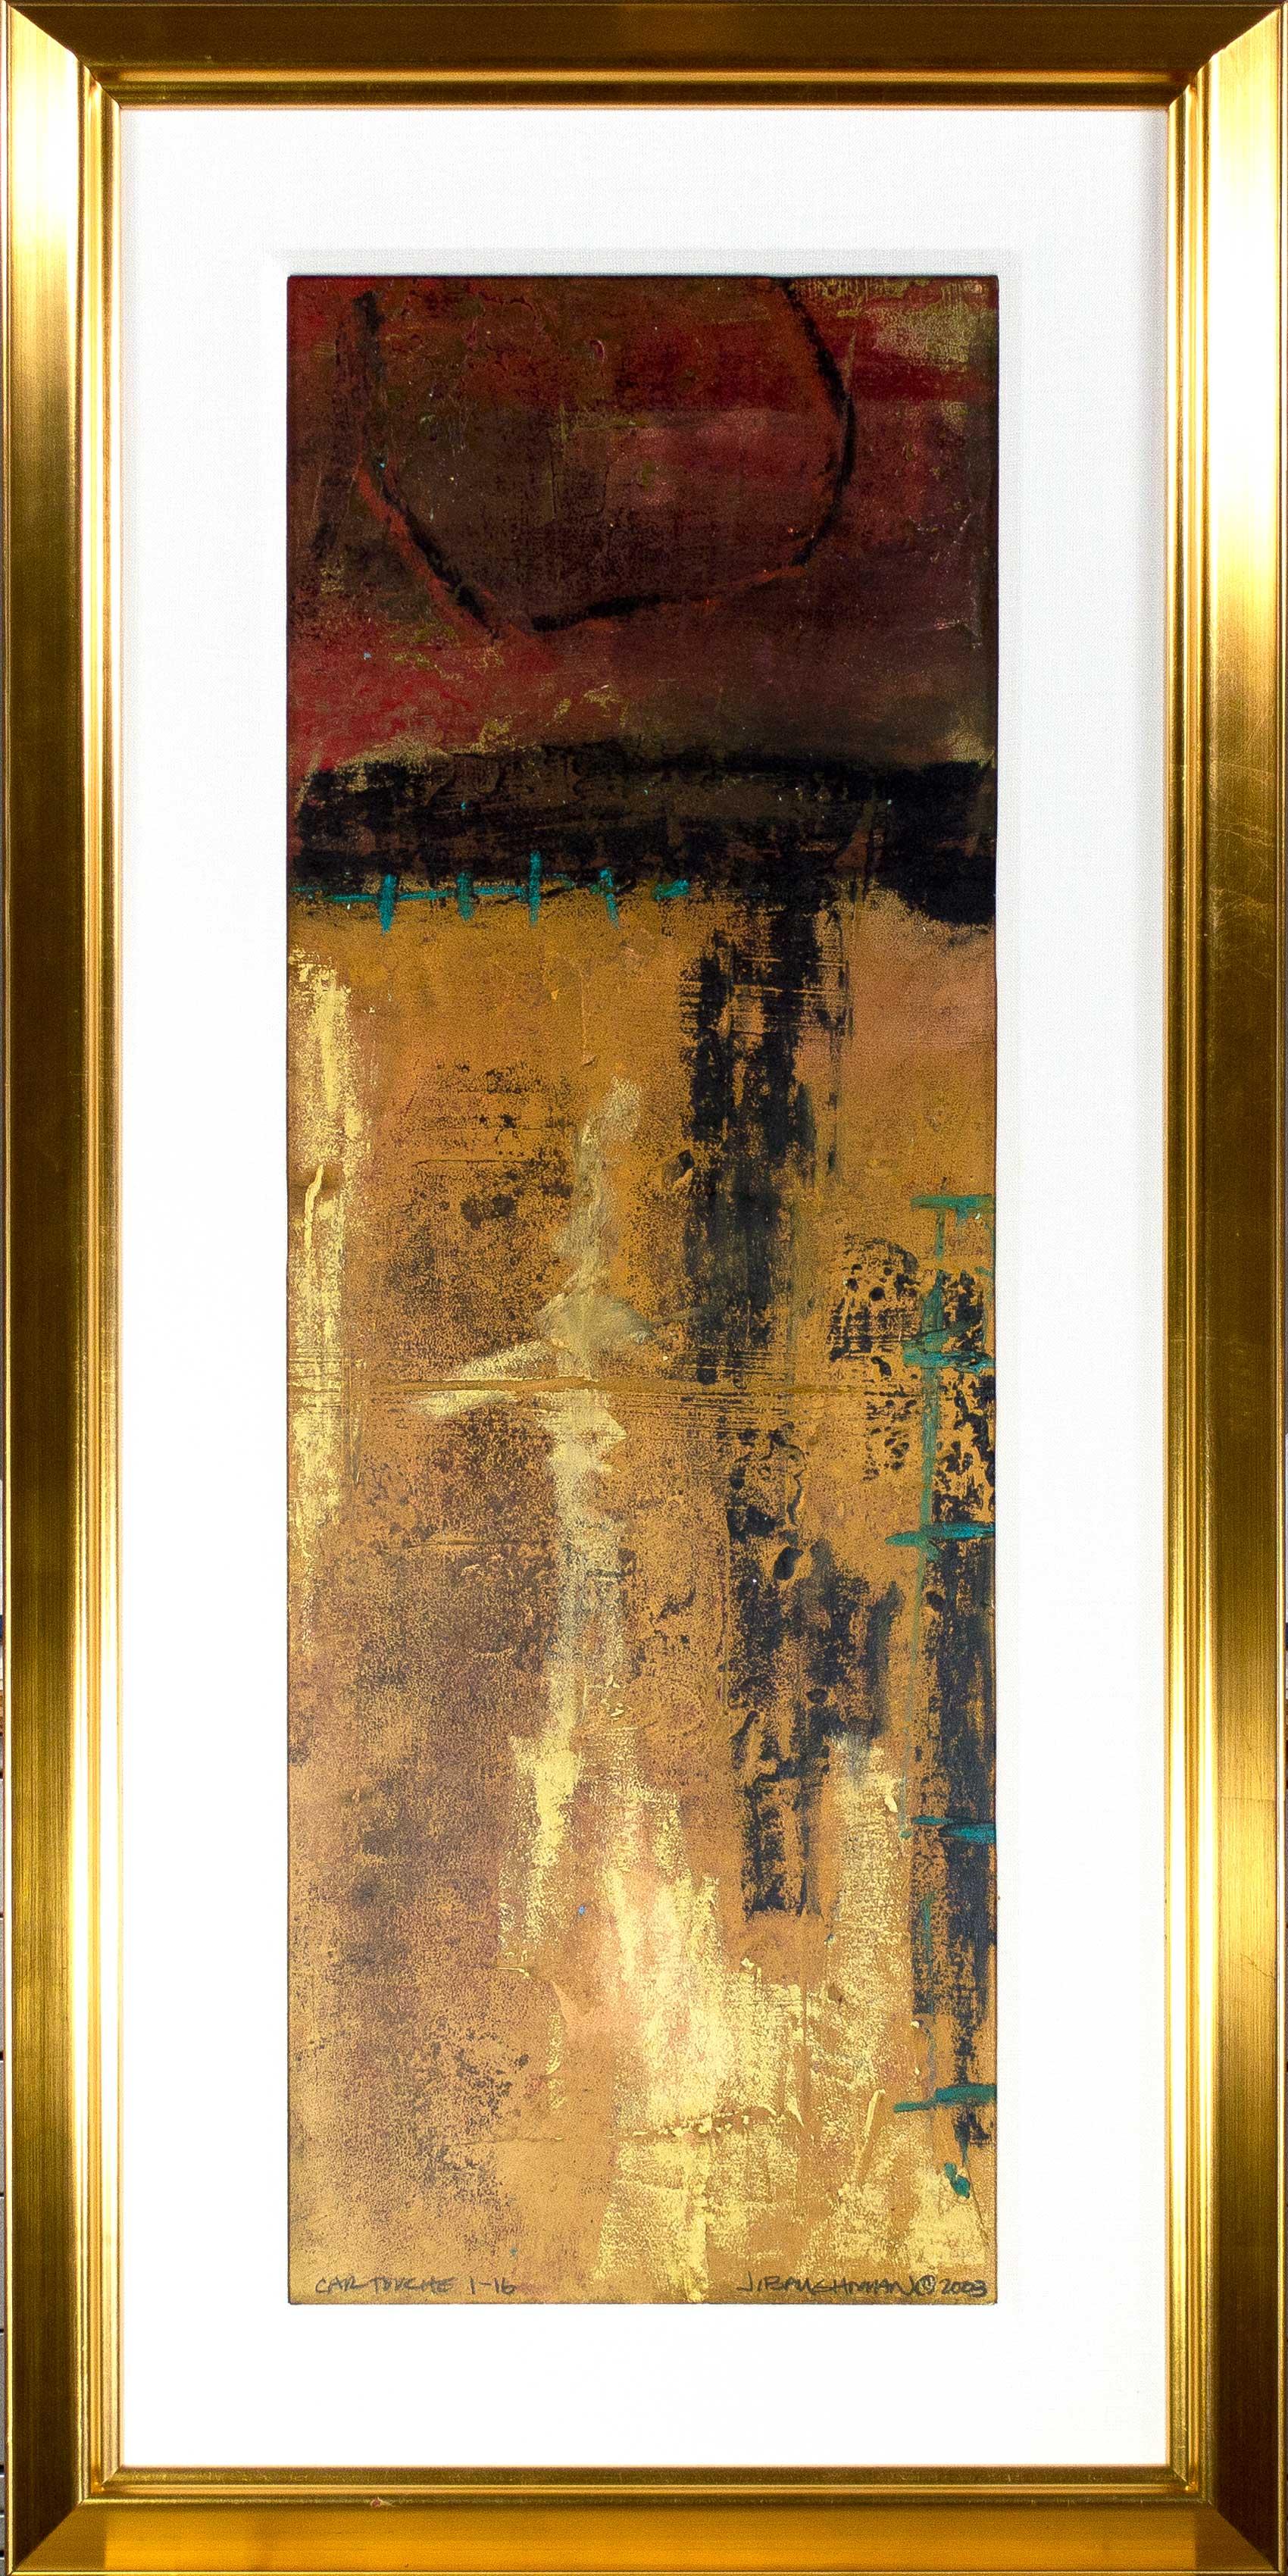 John Baughman Abstract Painting - 'Cartouche 1-16' Mixed Media, Signed & Dated by Artist